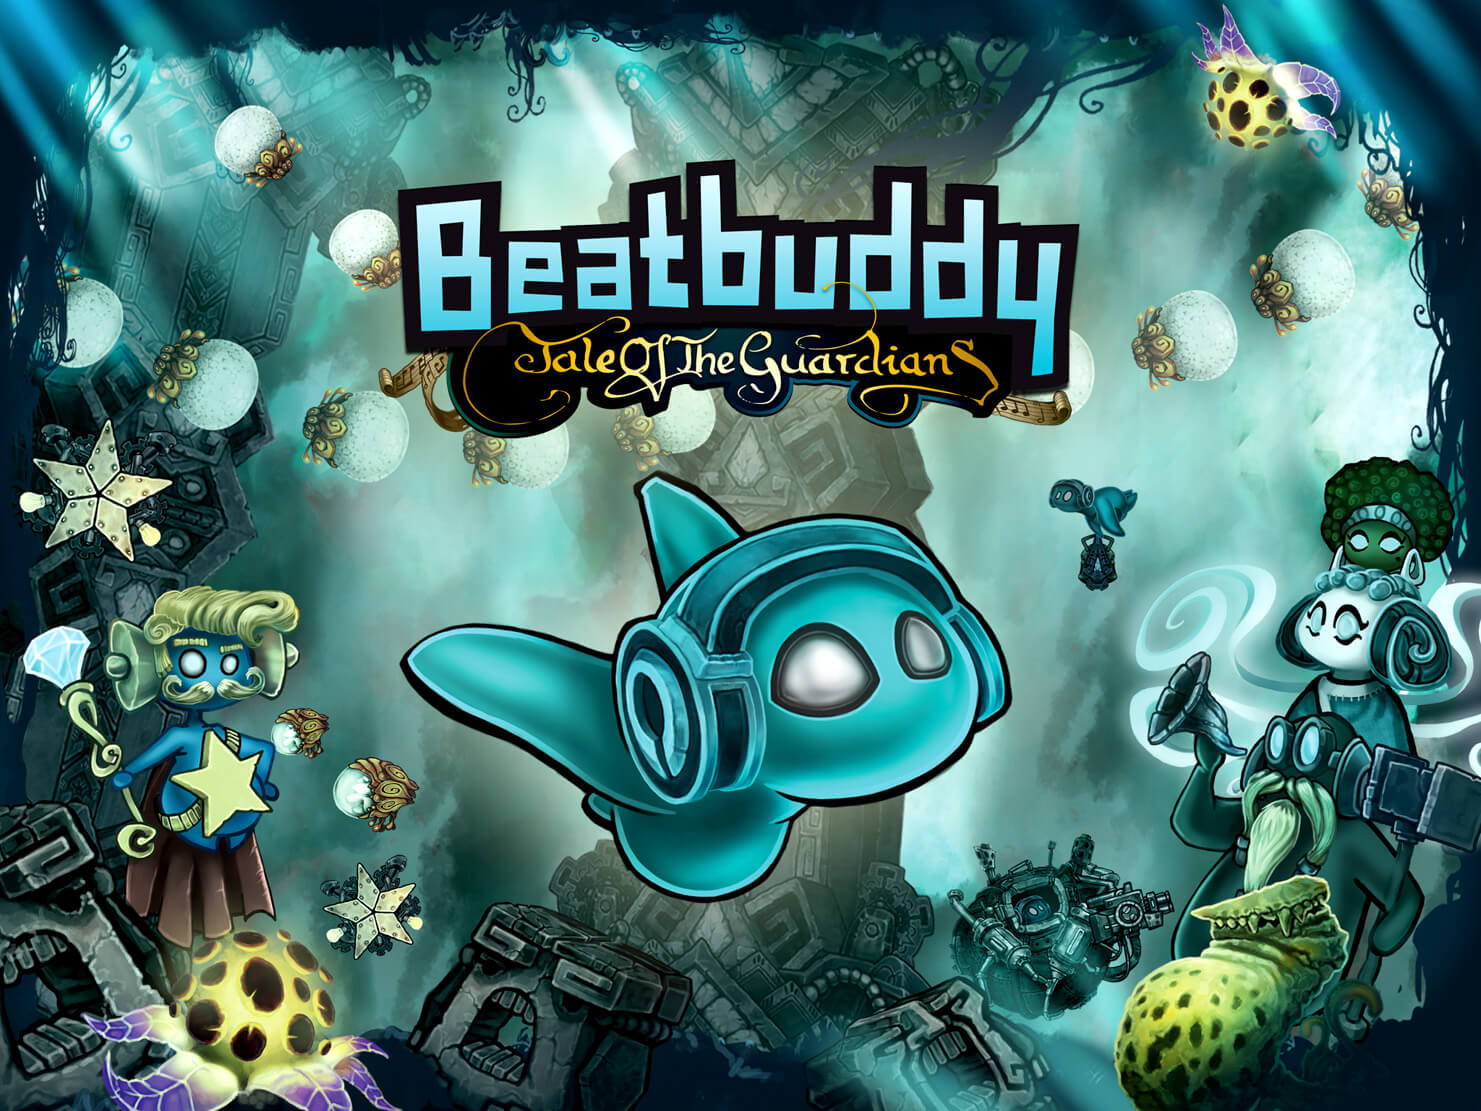 Beatbuddy: Ultimate Edition Download Epic Games